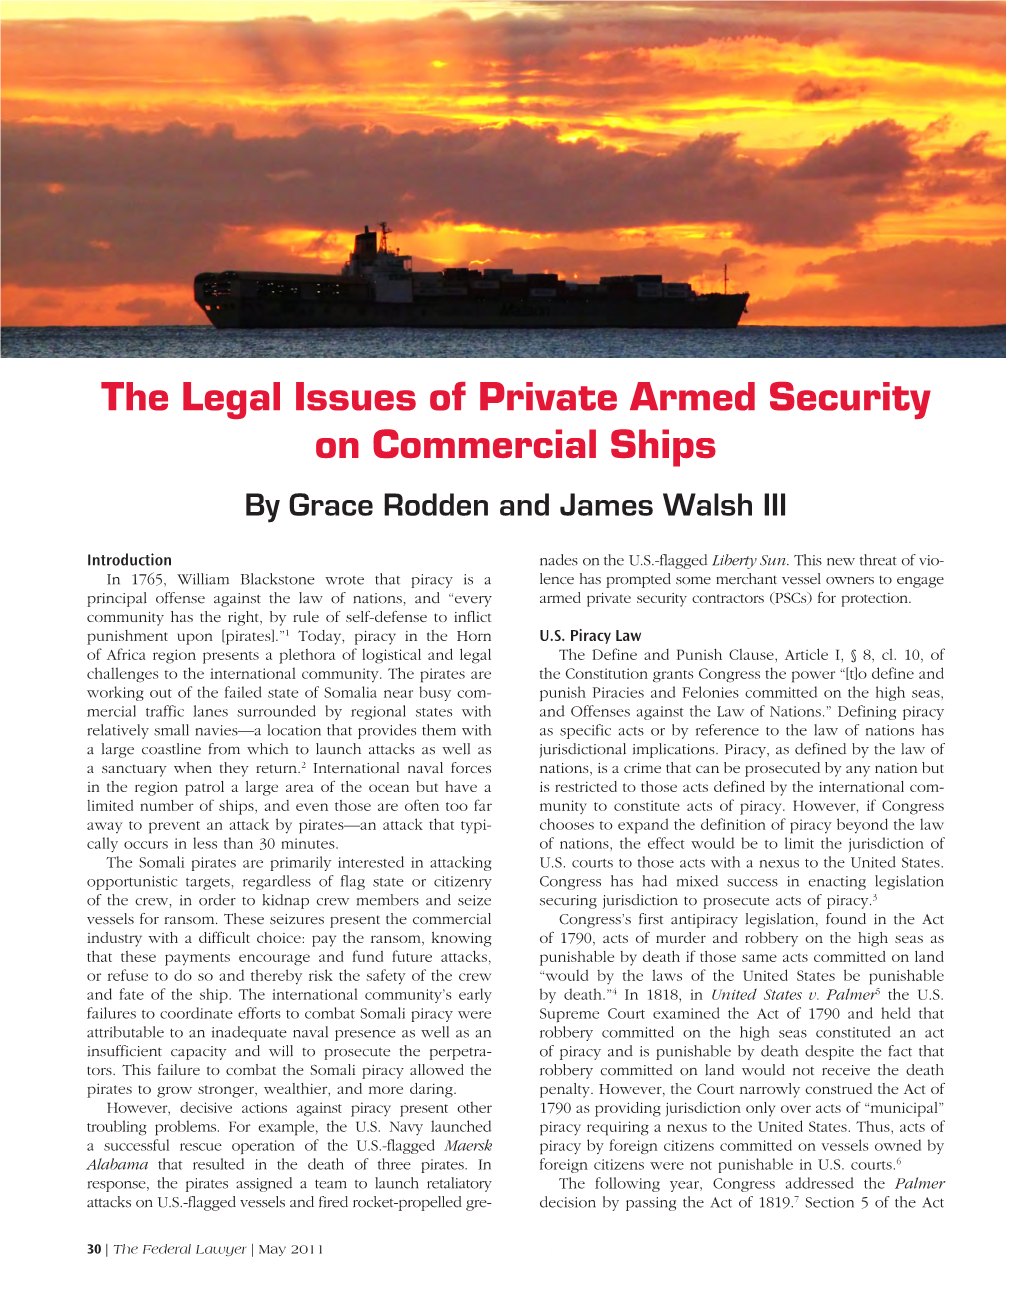 The Legal Issues of Private Armed Security on Commercial Ships by Grace Rodden and James Walsh III